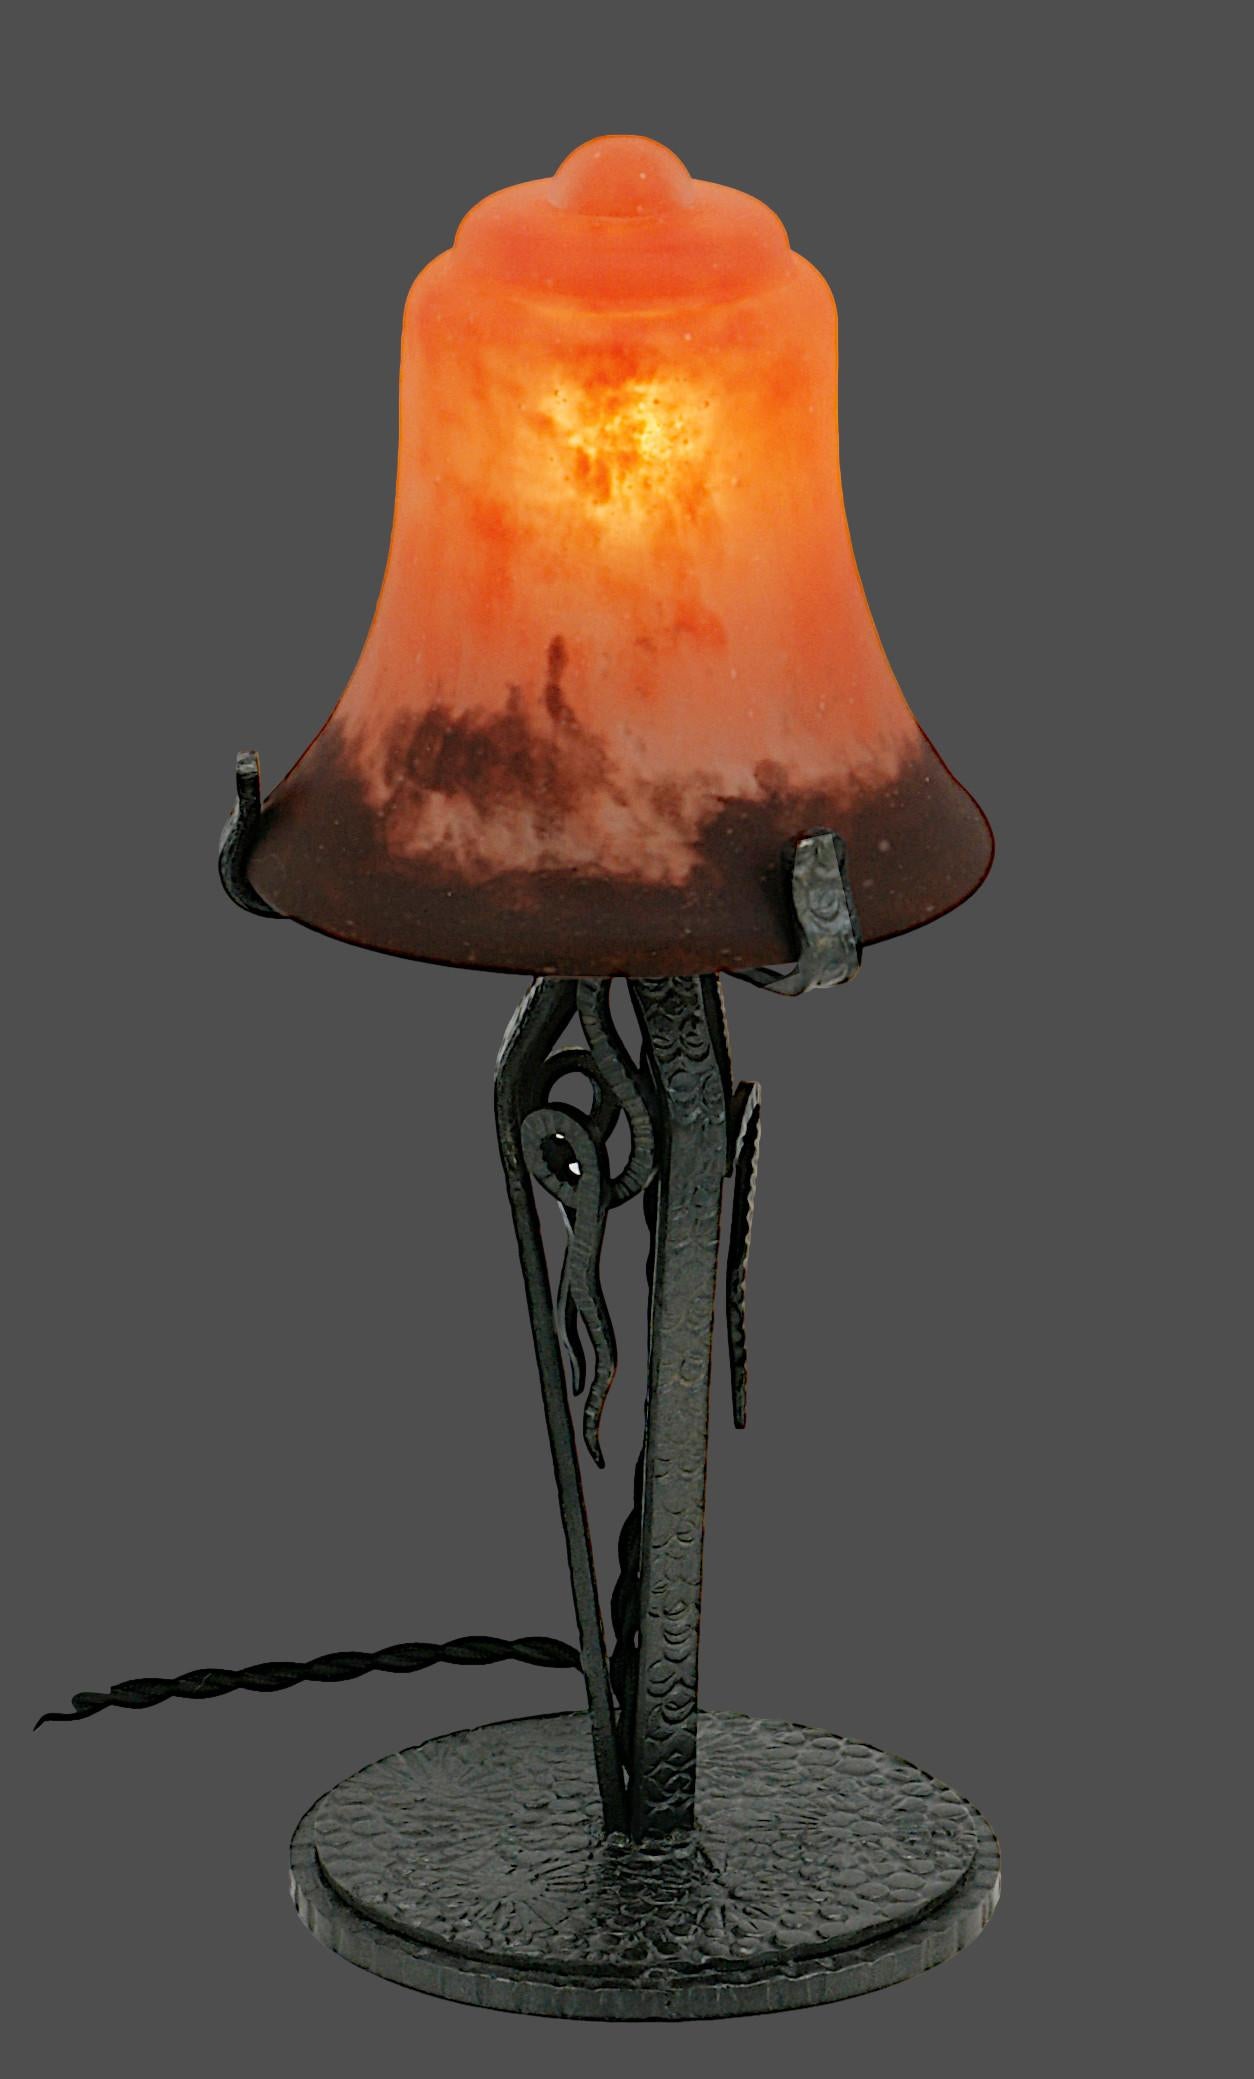 French Art Deco table lamp by DAUM (Croismare), France, 1920s. Blown double glass shade by Daum on its precious wrought iron base. Colors : orange and purple. Height : 11.8